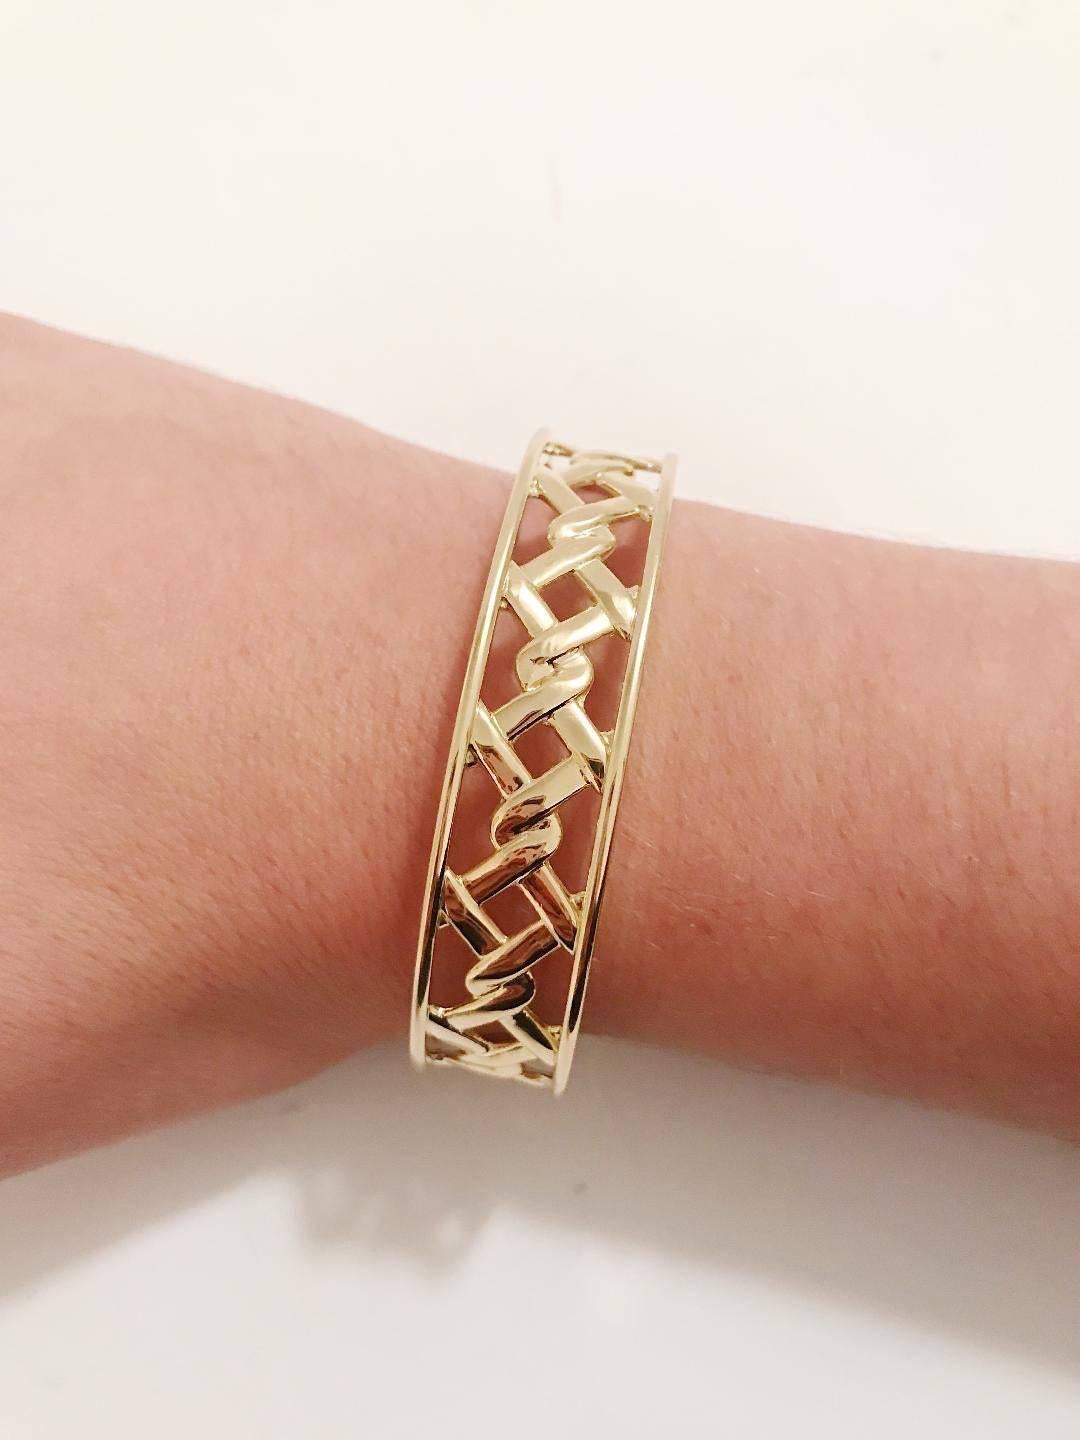 18kt Yellow Gold Mini Ordaned Cuff Bracelet. 

This bracelet can be made to any size wrist and any color gold.

Please let me know if you have any questions.

Best,
Christina